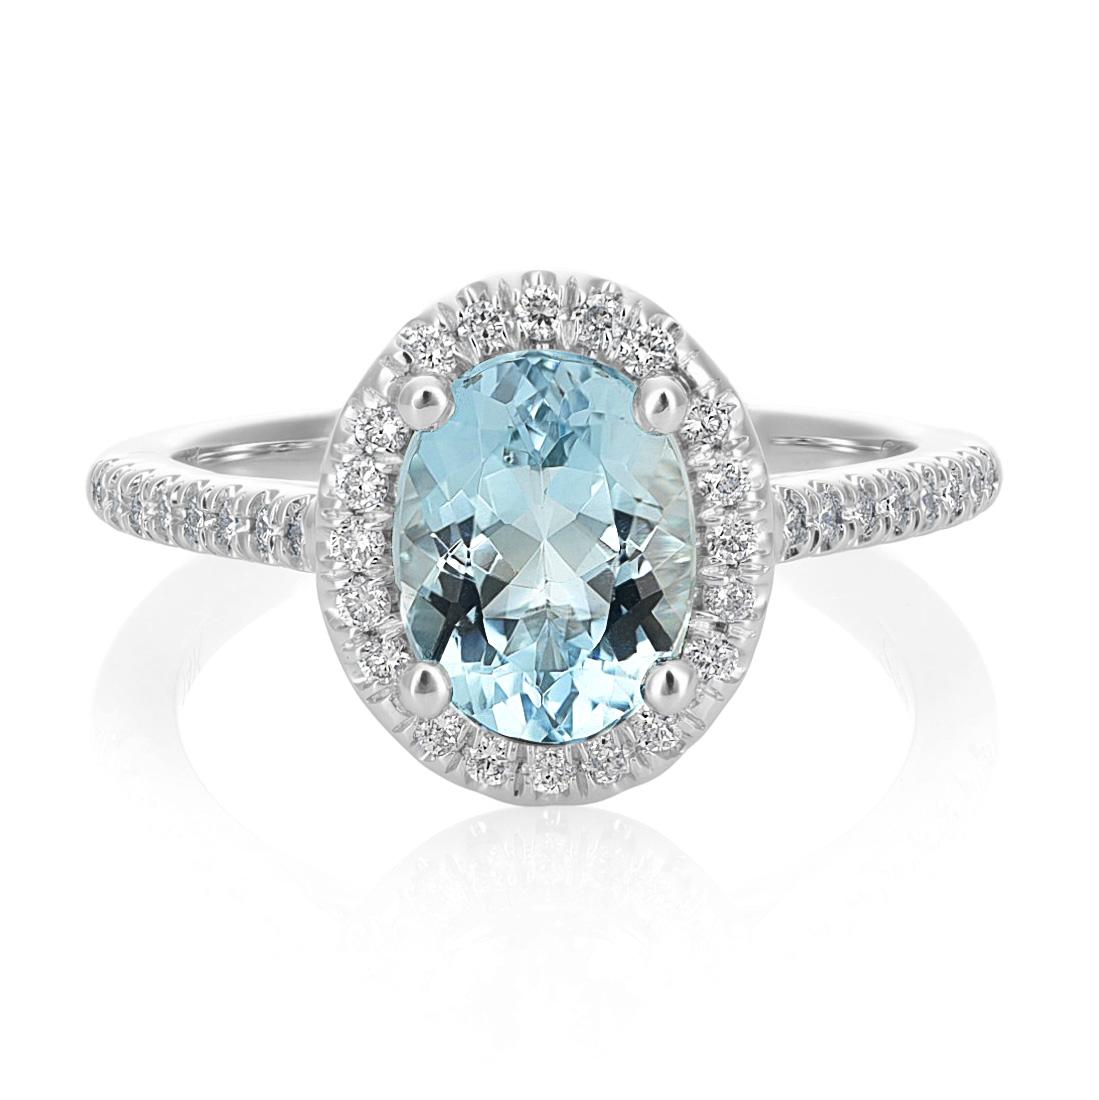 1.02 Carats Natural Aquamarine Diamonds set in 14K White Gold Ring In New Condition For Sale In Los Angeles, CA